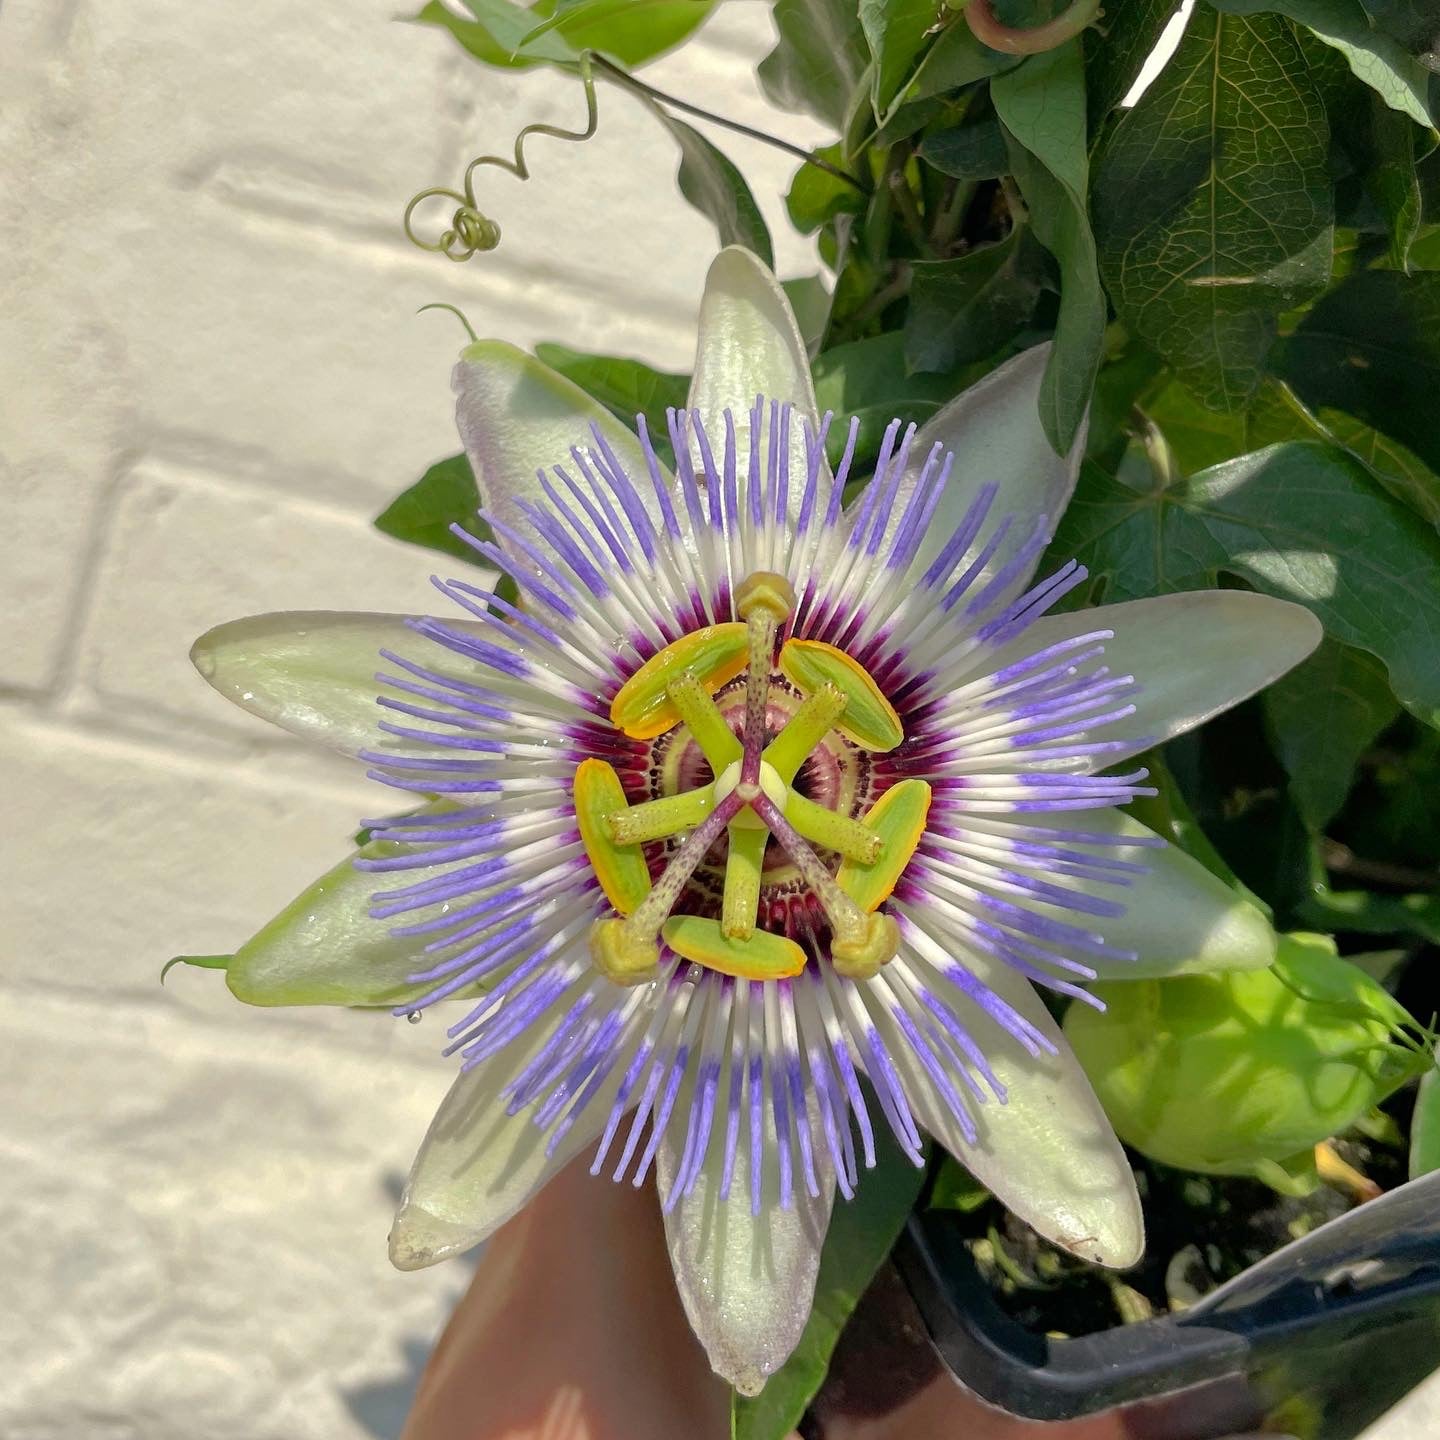 5" Passionflower